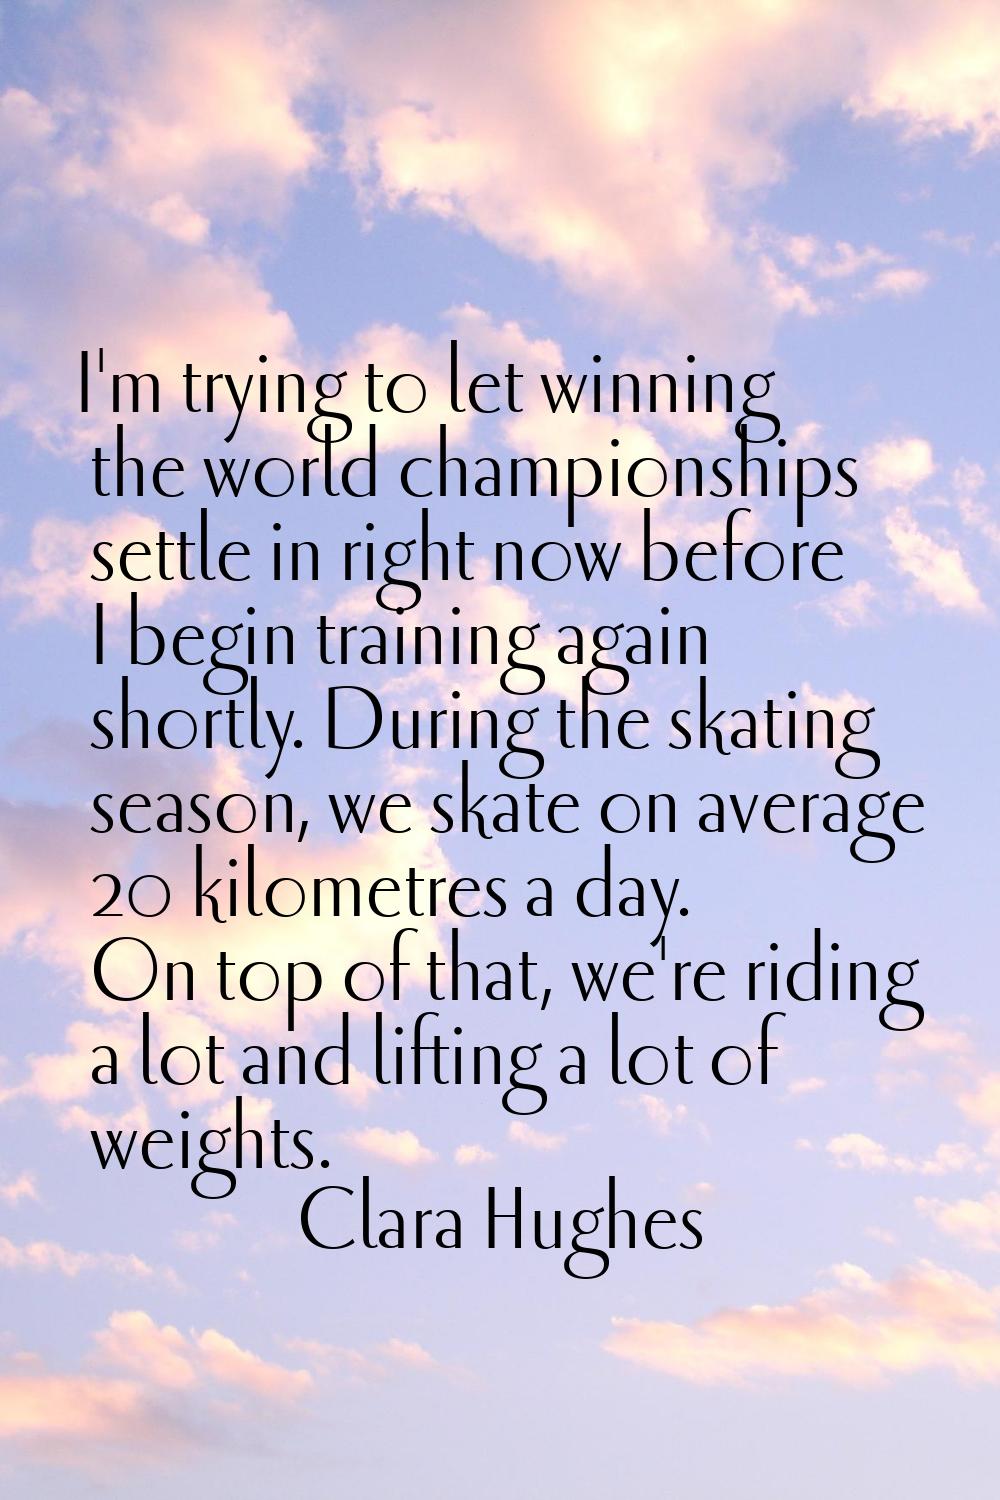 I'm trying to let winning the world championships settle in right now before I begin training again